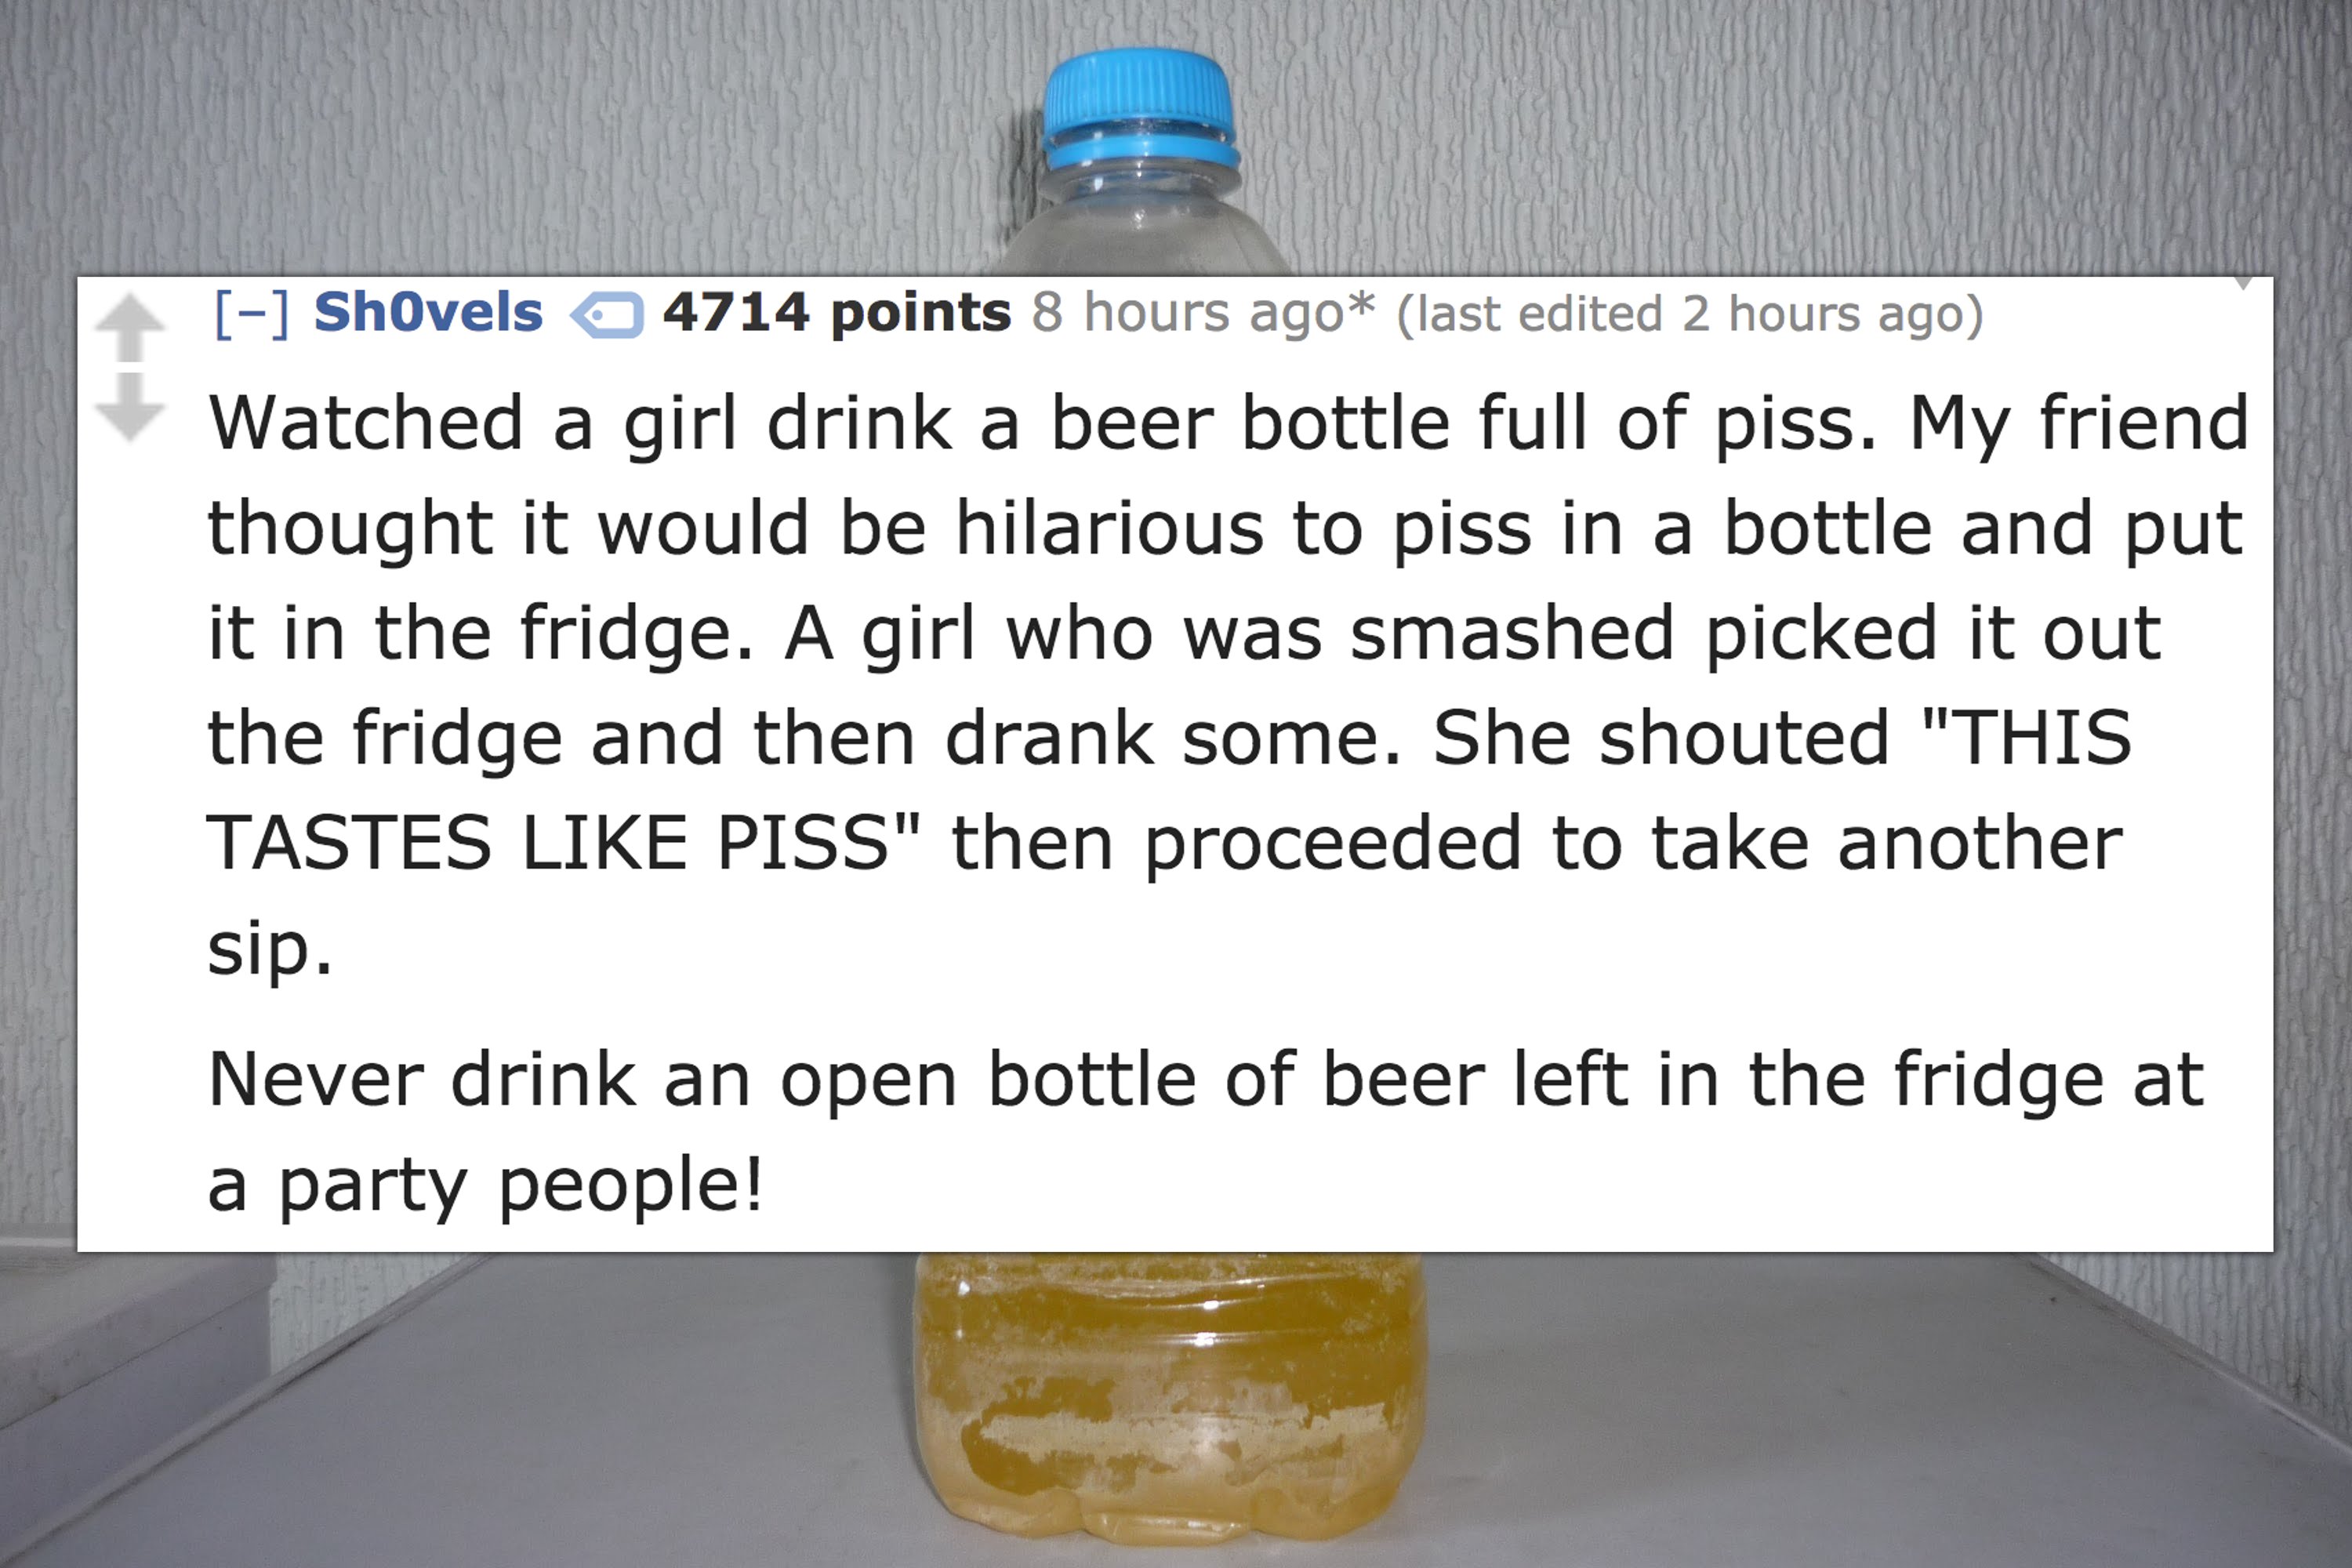 water - Shovels a4714 points 8 hours ago last edited 2 hours ago Watched a girl drink a beer bottle full of piss. My friend thought it would be hilarious to piss in a bottle and put it in the fridge. A girl who was smashed picked it out the fridge and the